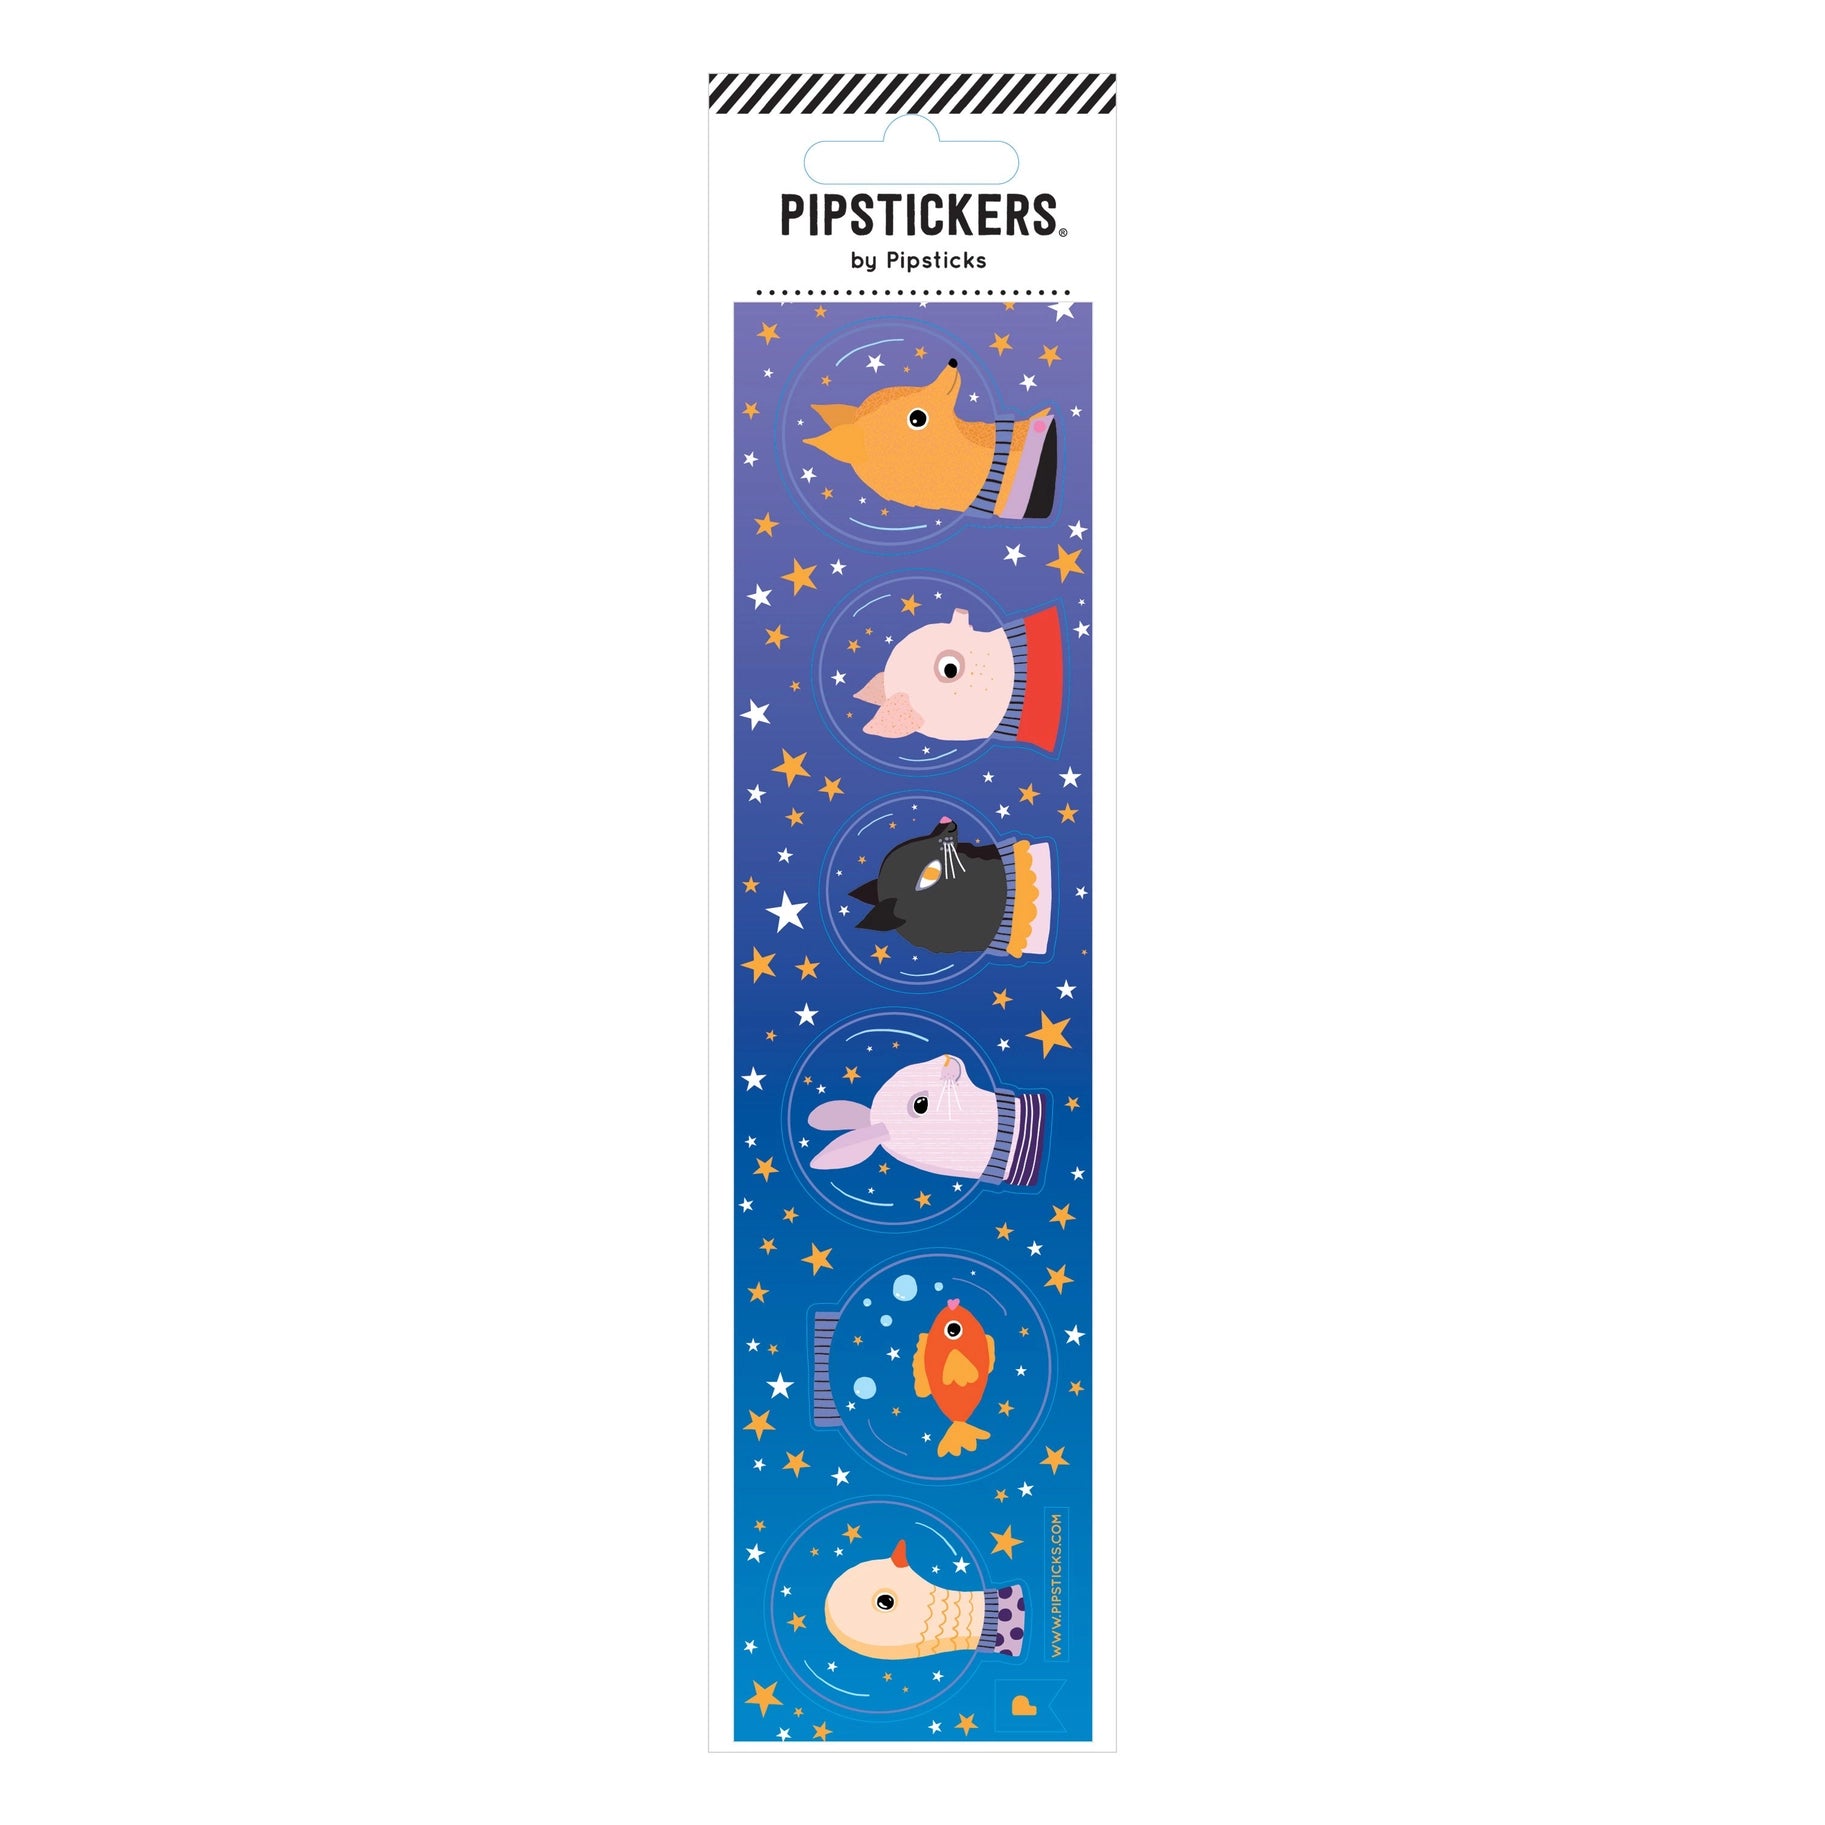 Animals in space theme background